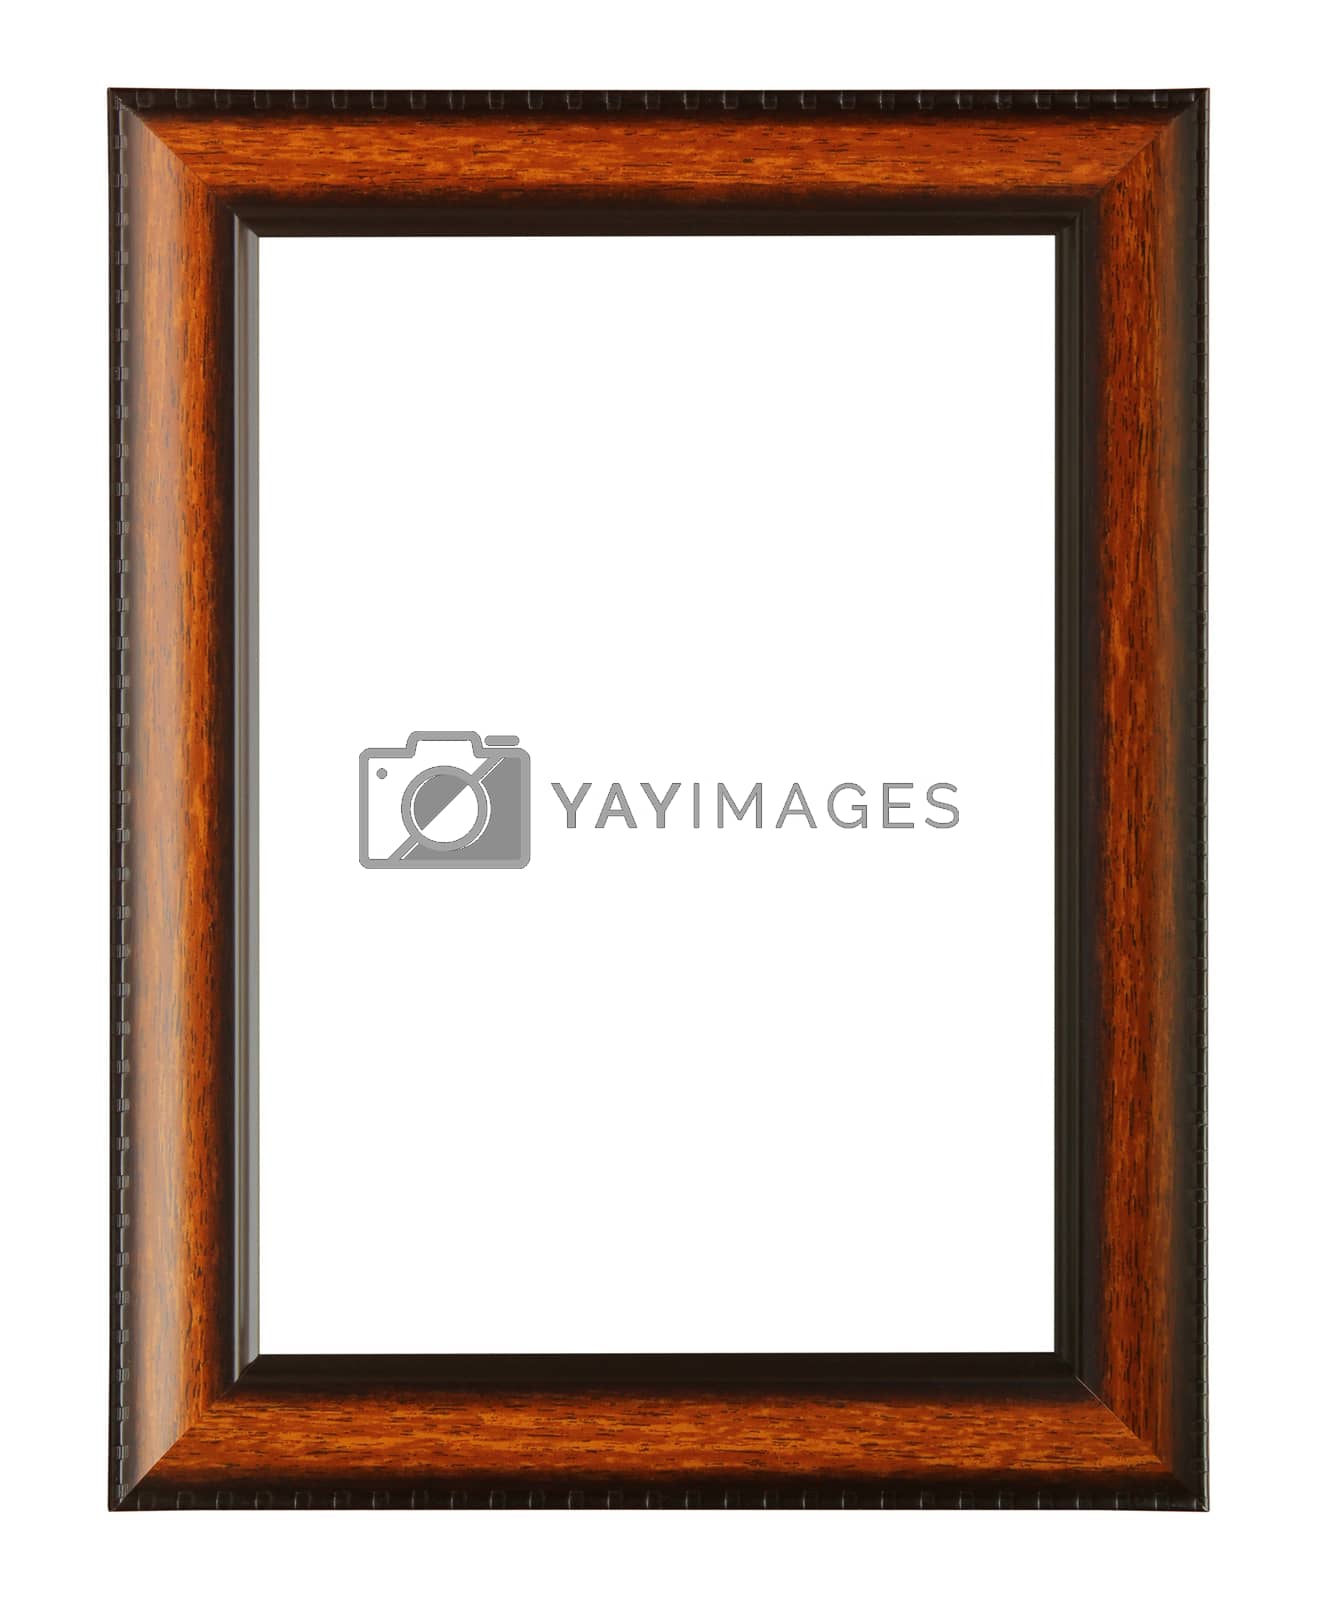 Royalty free image of Frame isolate on white by liewluck